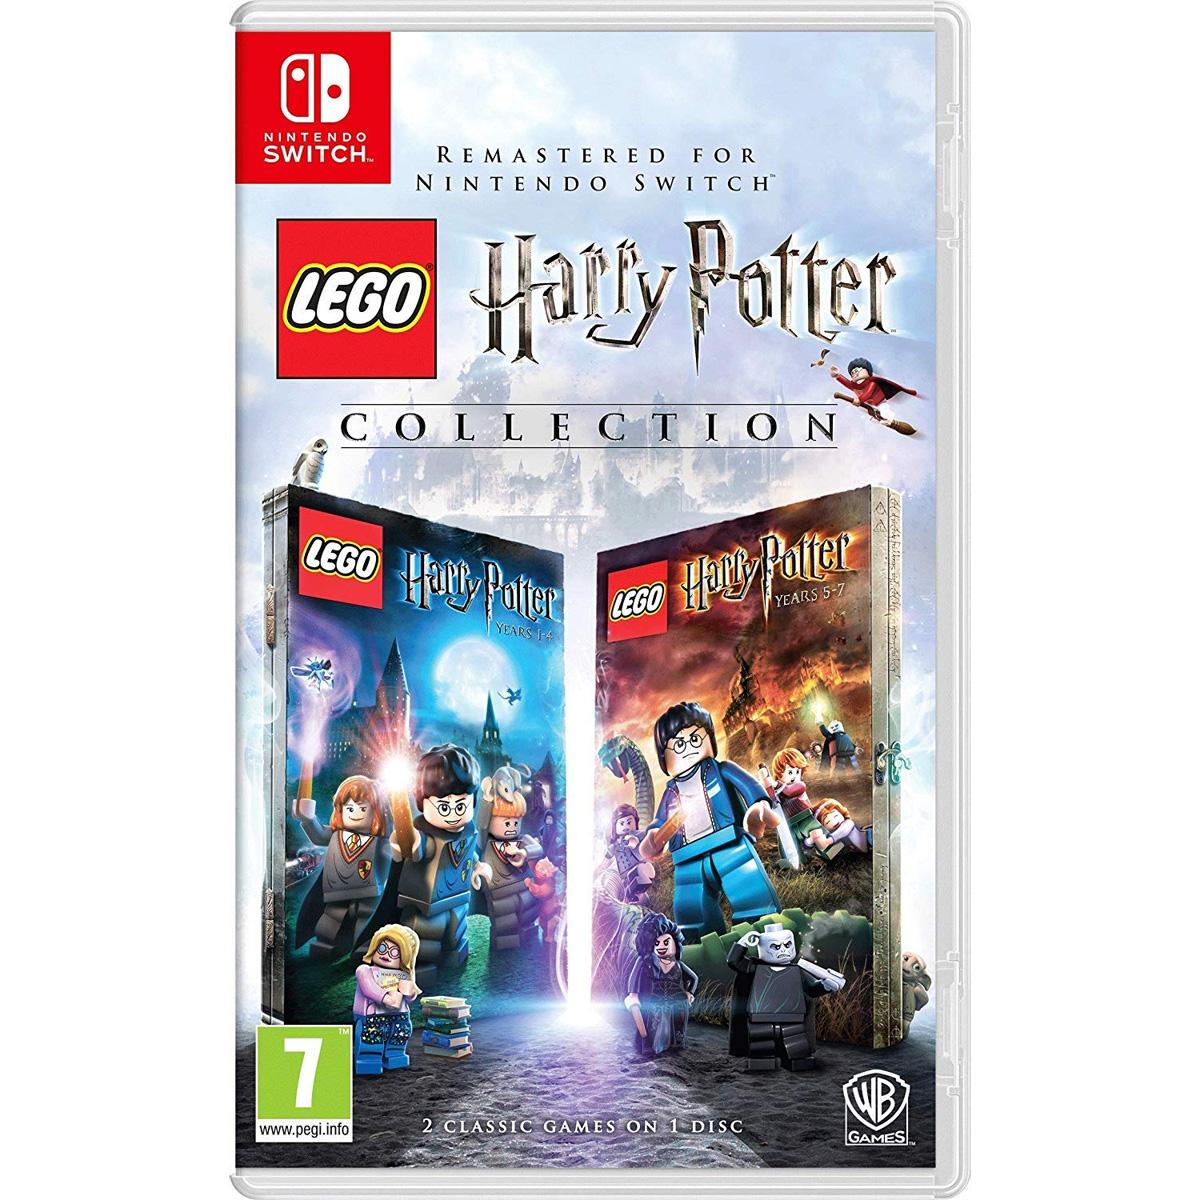 Lego Harry Potter Collection Remastered Nintendo Switch for $9.99